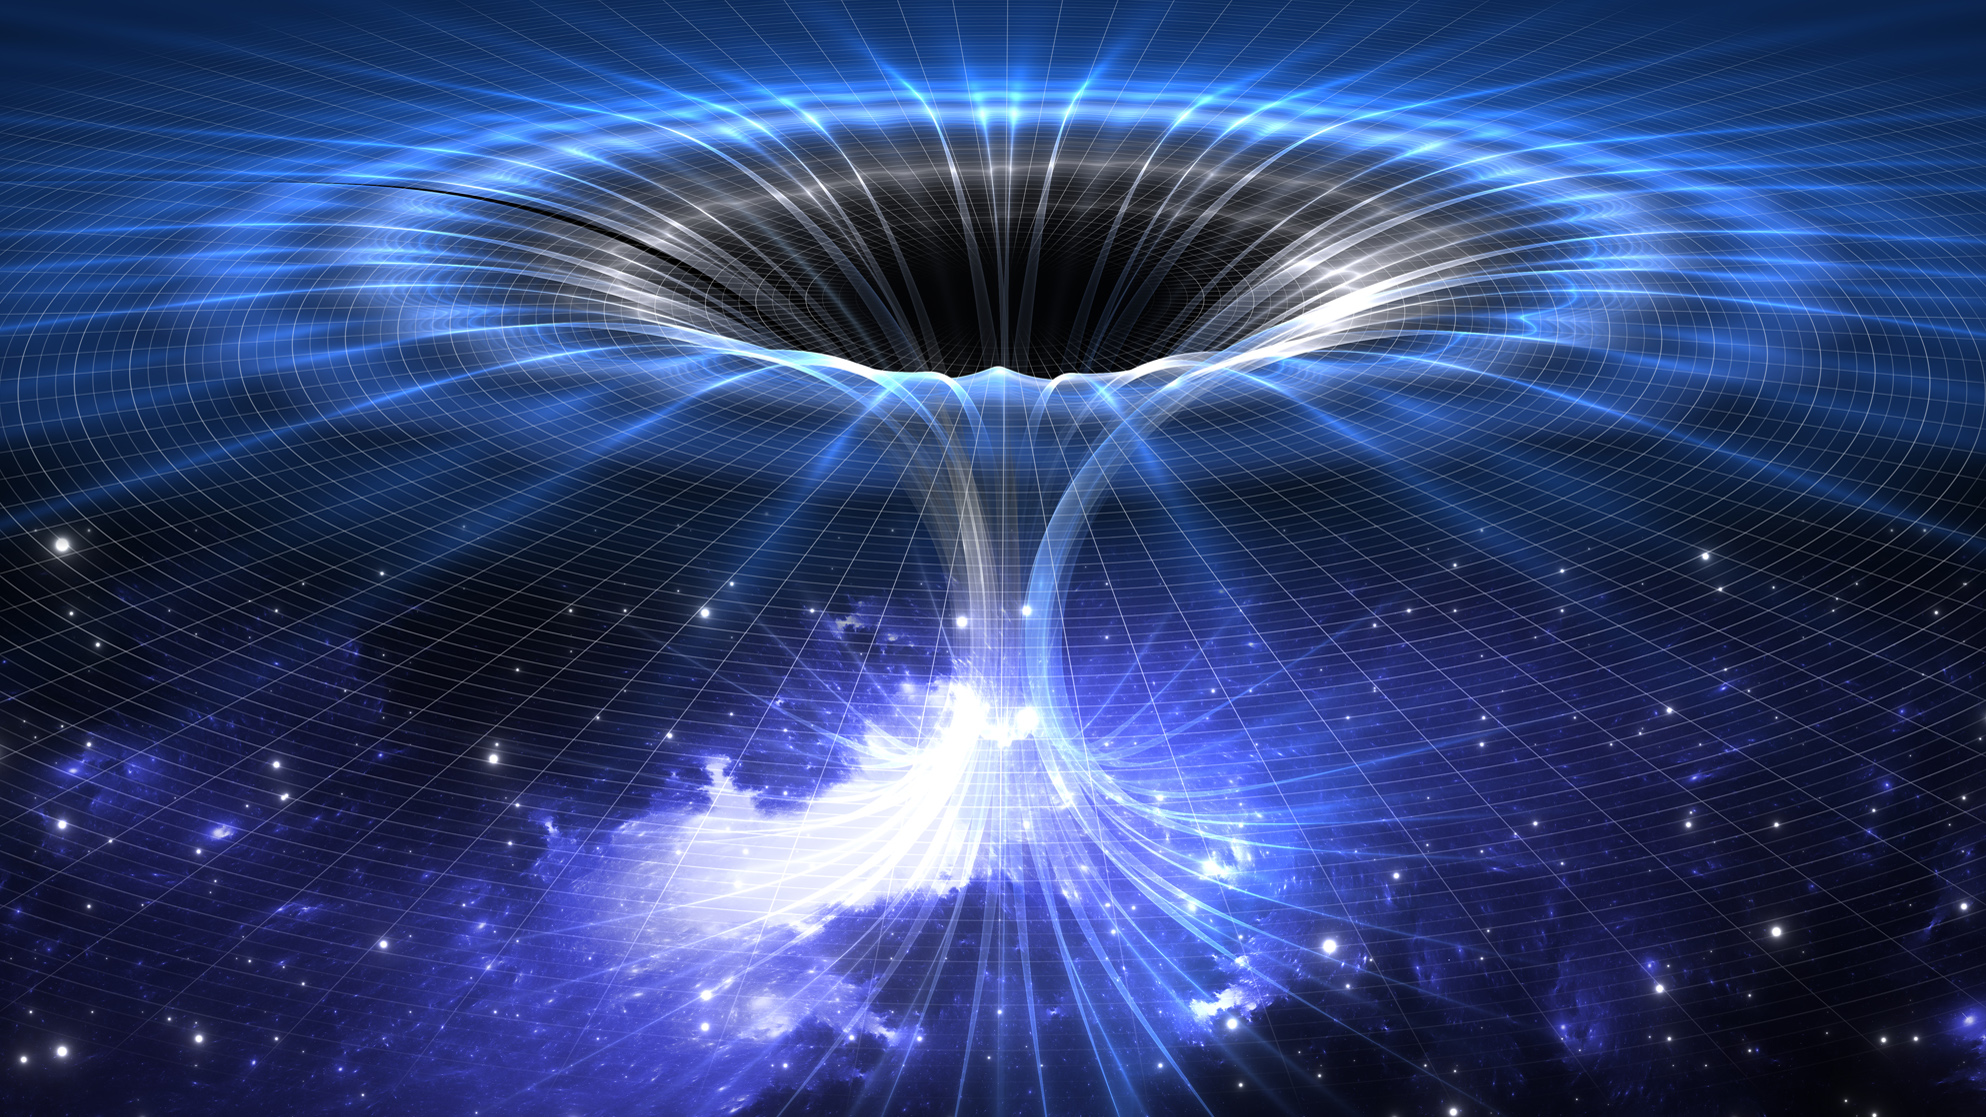 Are some black holes wormholes in disguise? Gamma-ray blasts may shed  clues. | Space